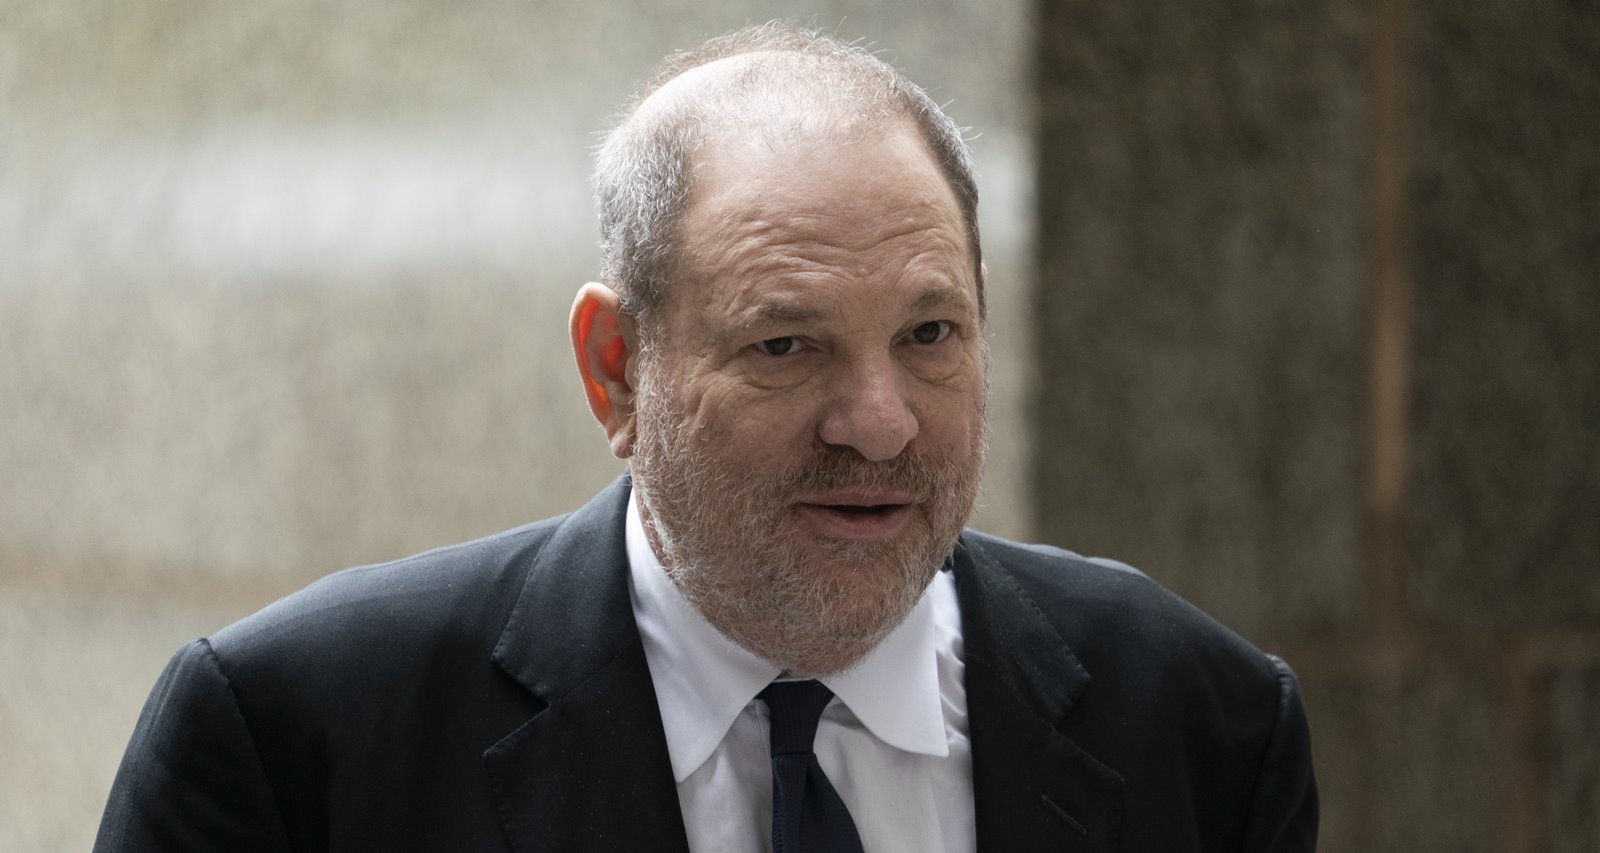 Harvey Weinstein Net Worth 2019: Trace the Downfall of the Dethroned Hollywood Mogul